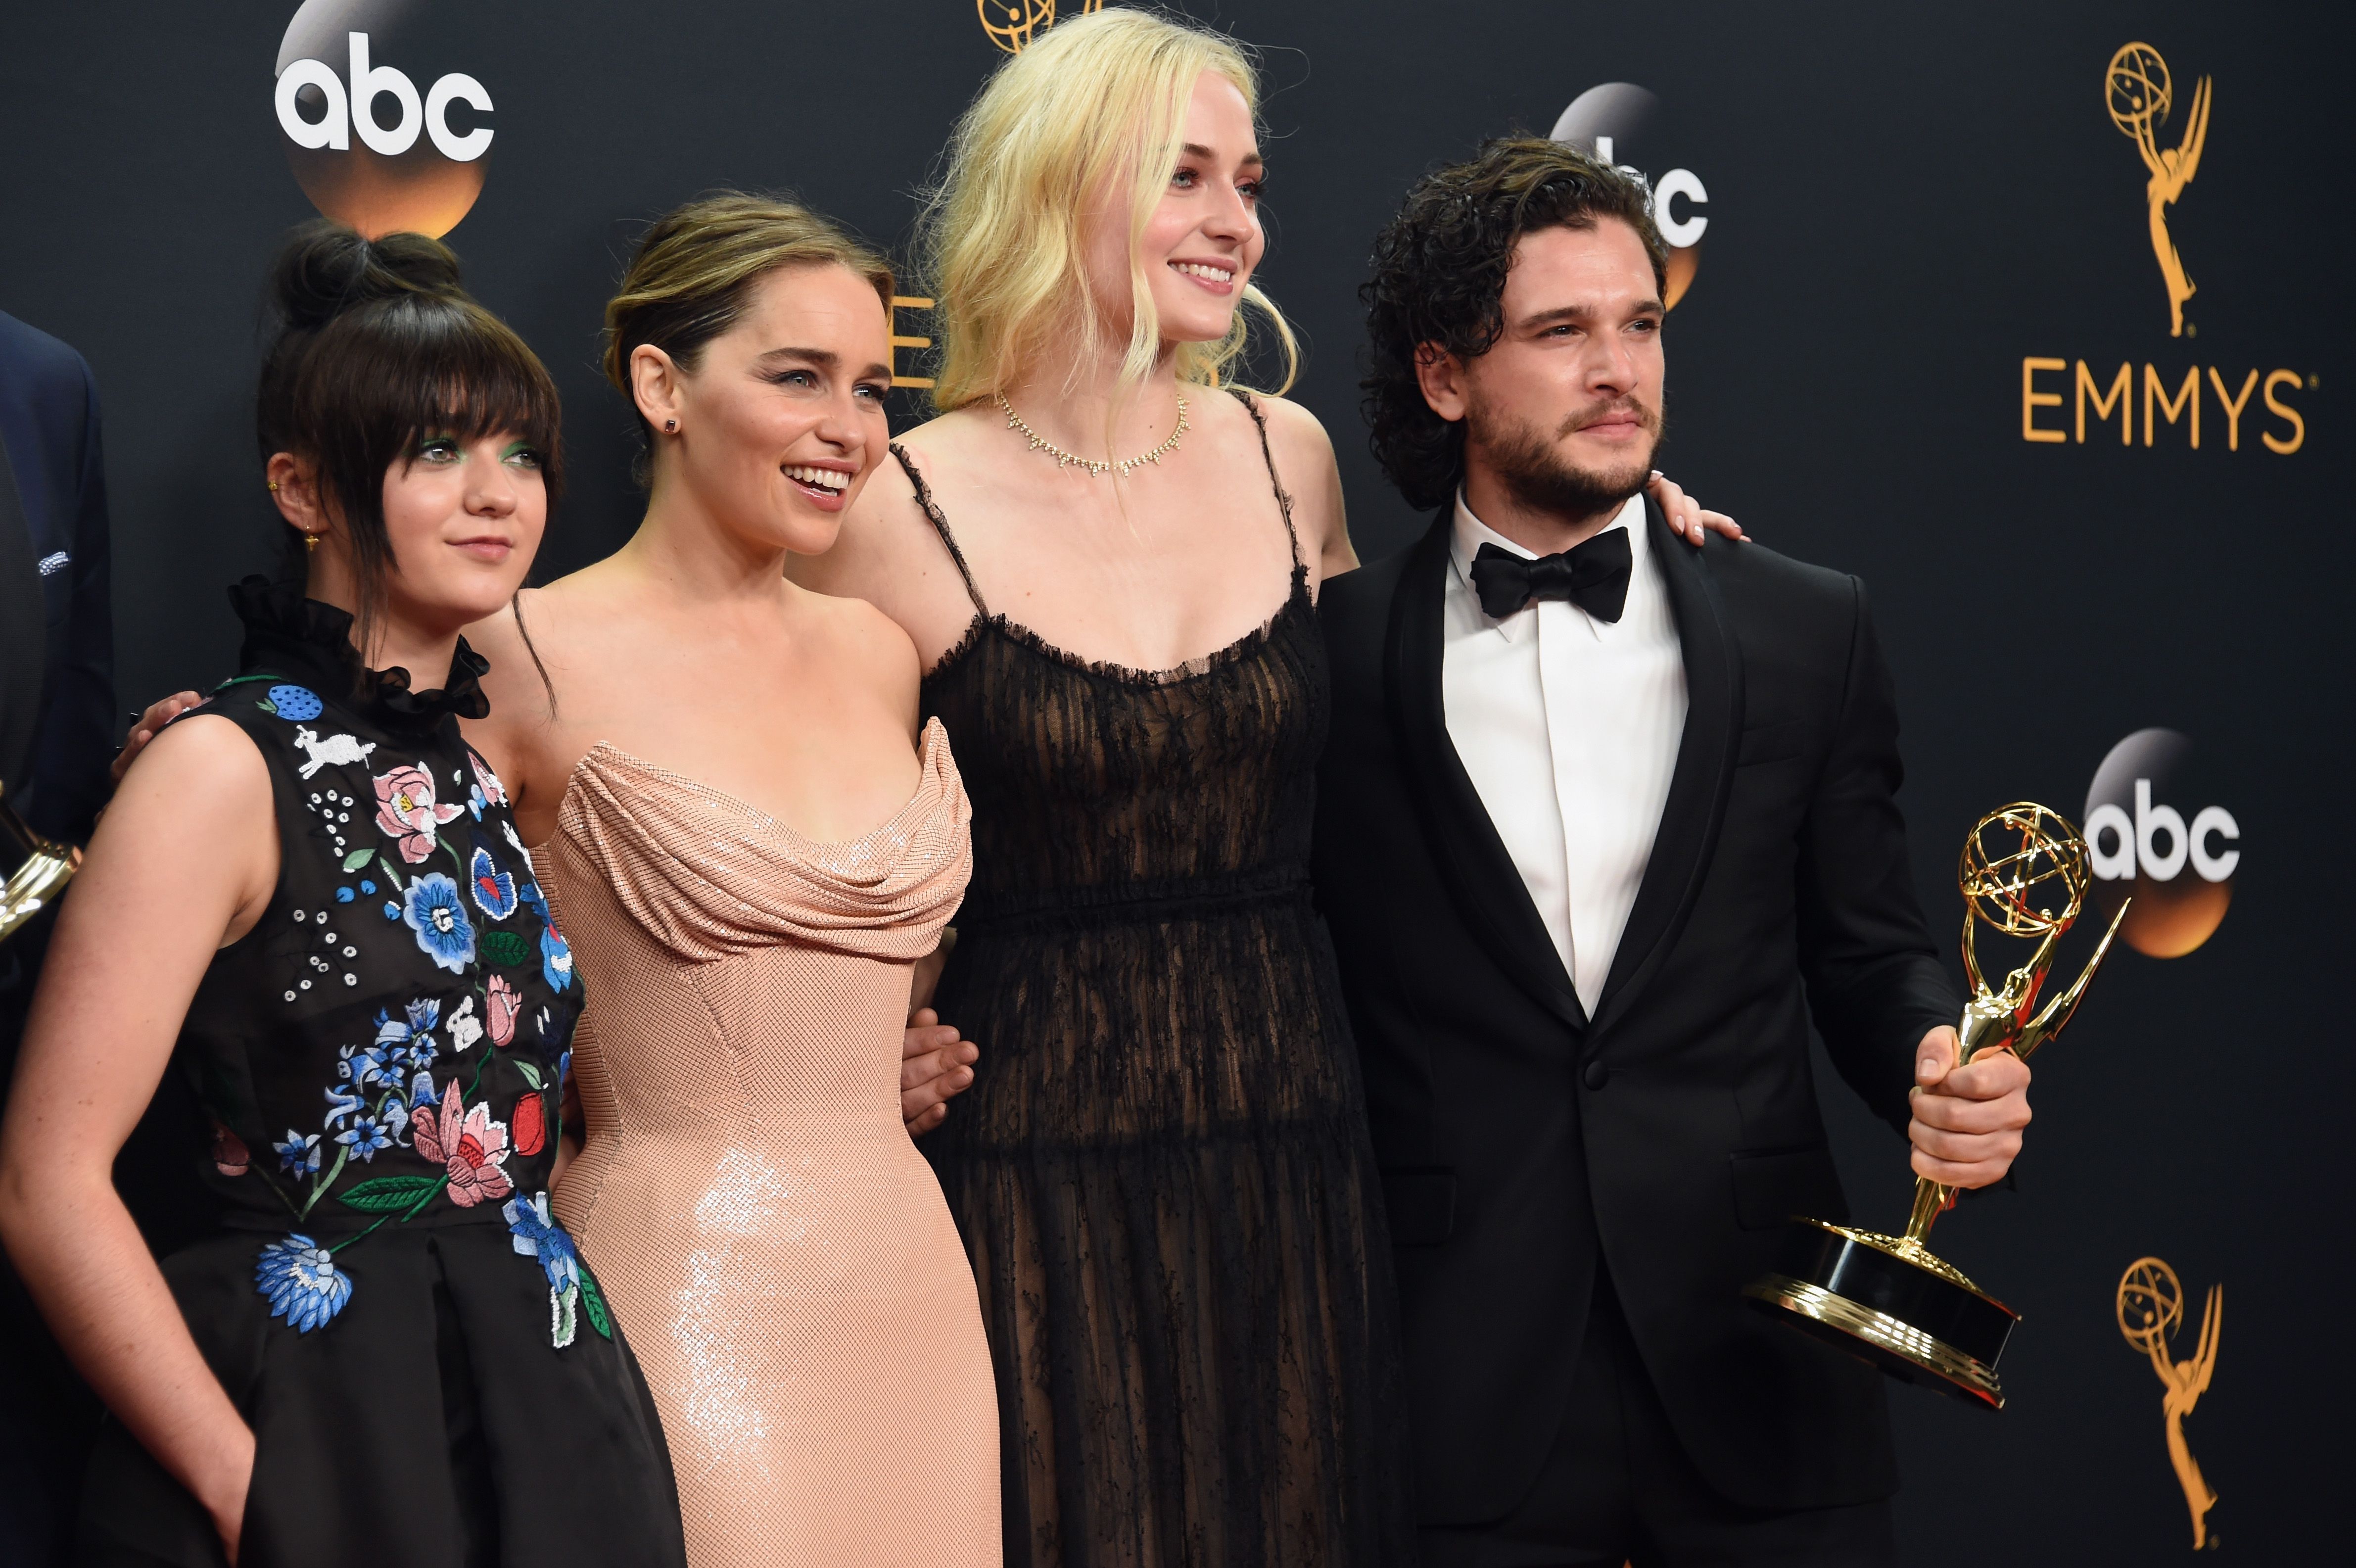 Why Sophie Turner and Maisie Williams Didn't Go to Emmys 2018